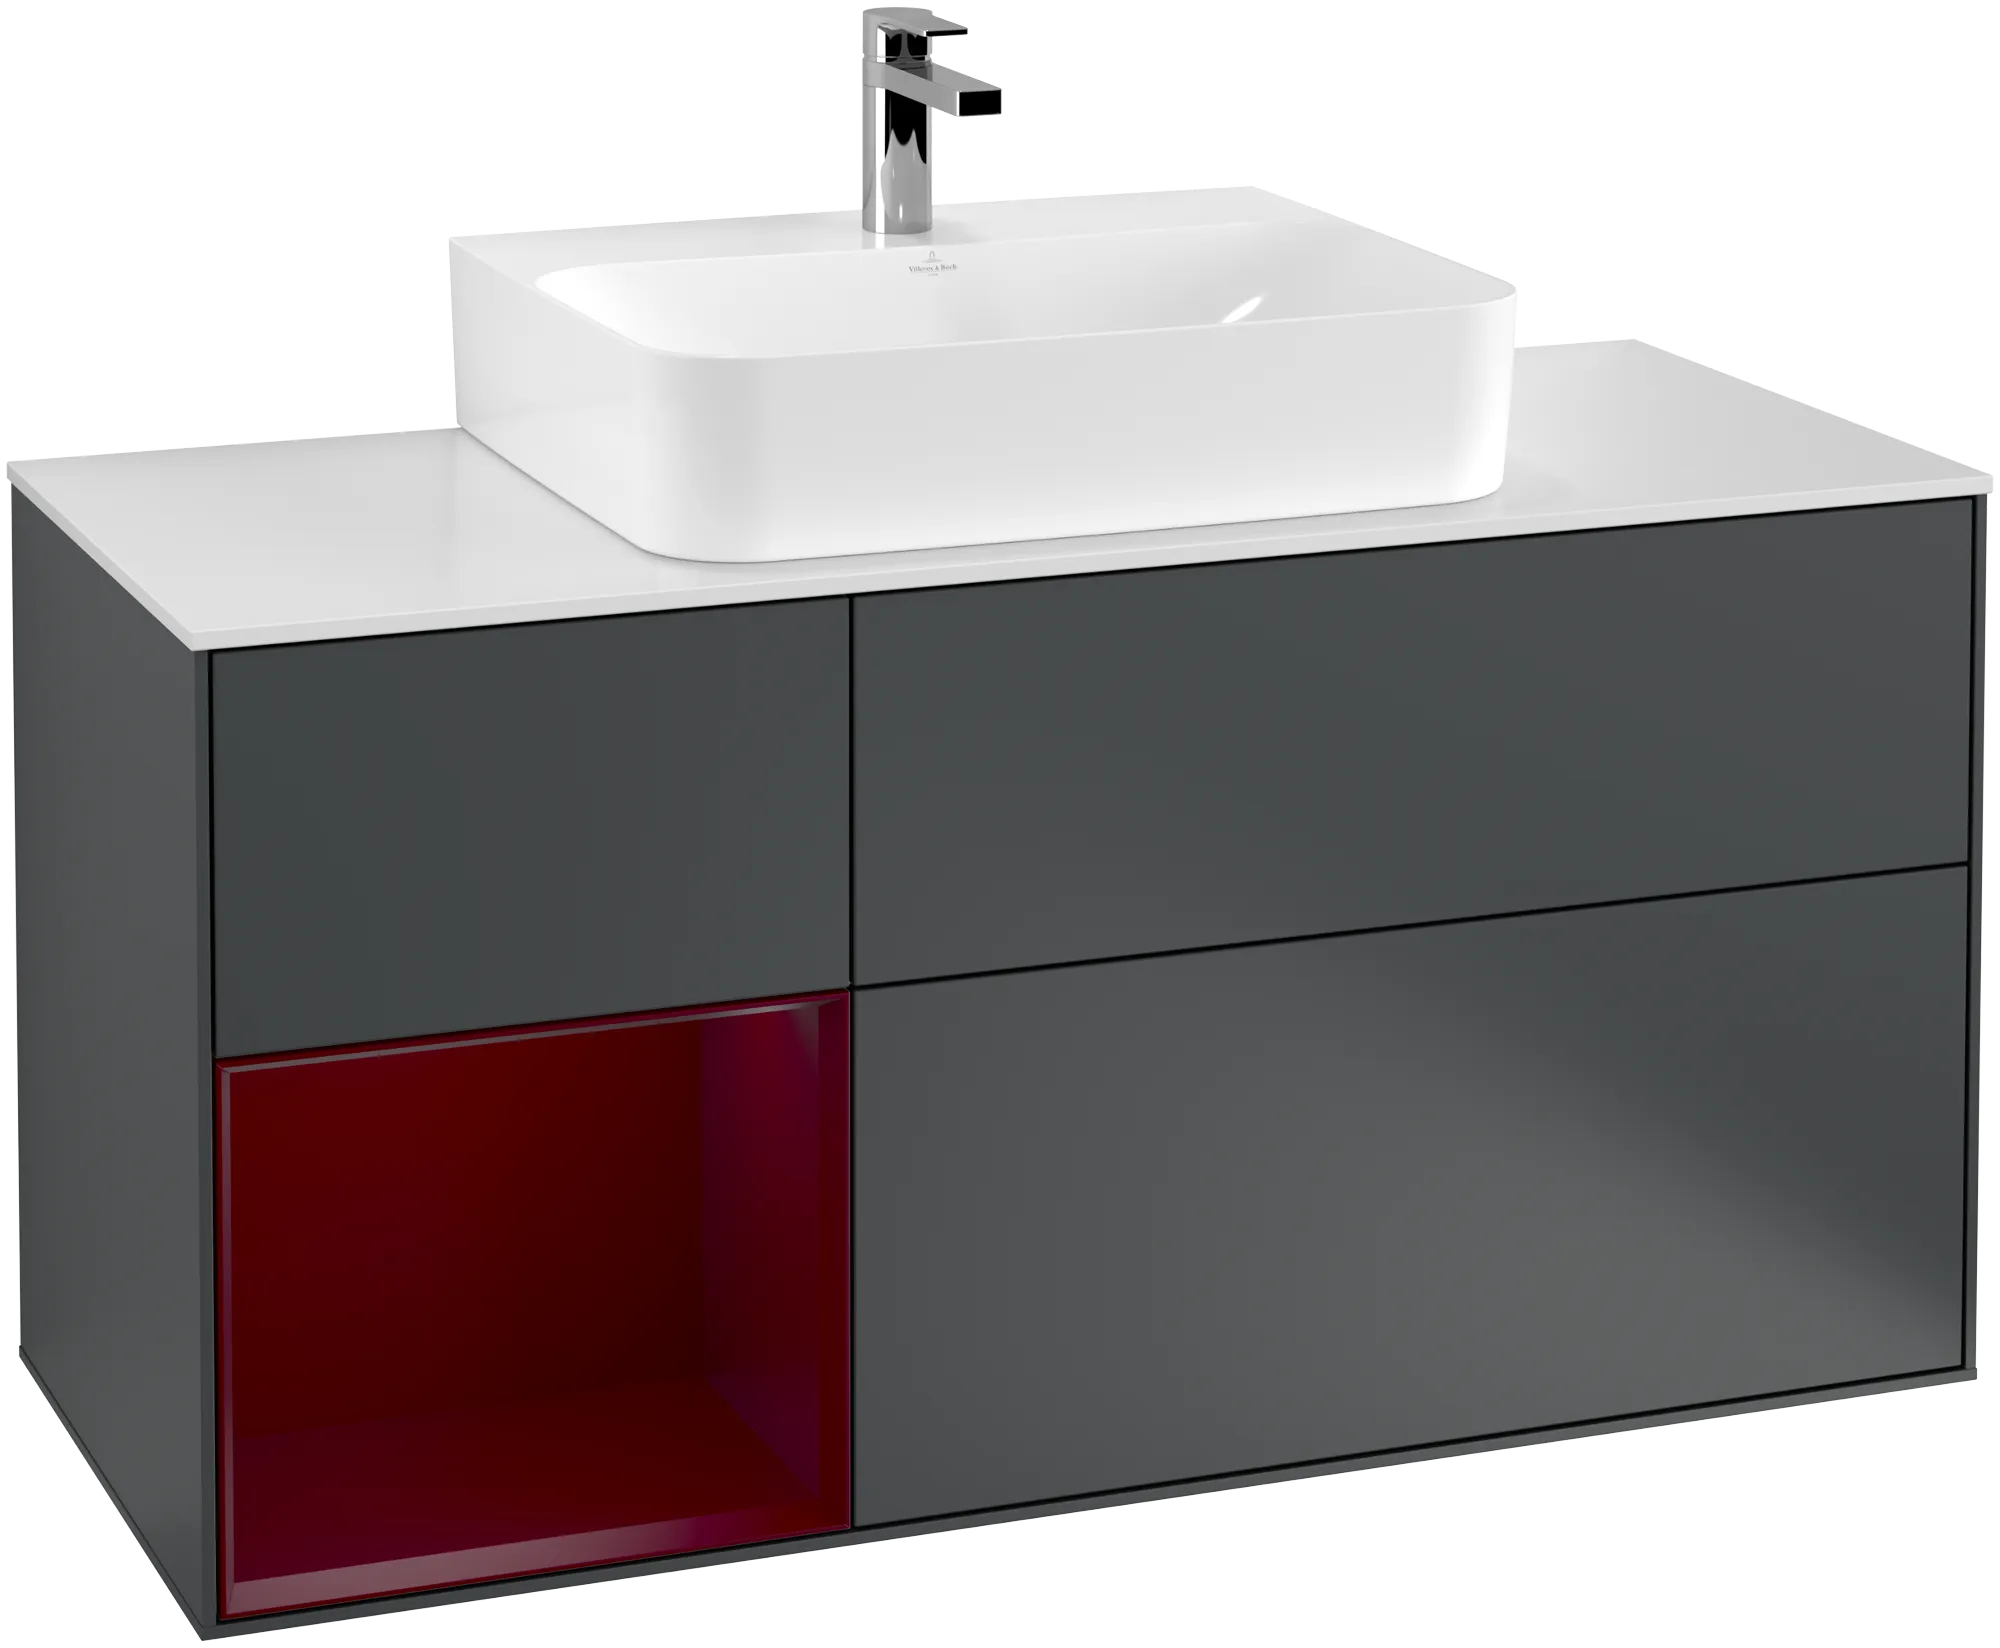 Picture of VILLEROY BOCH Finion Vanity unit, with lighting, 3 pull-out compartments, 1200 x 603 x 501 mm, Midnight Blue Matt Lacquer / Peony Matt Lacquer / Glass White Matt #G161HBHG